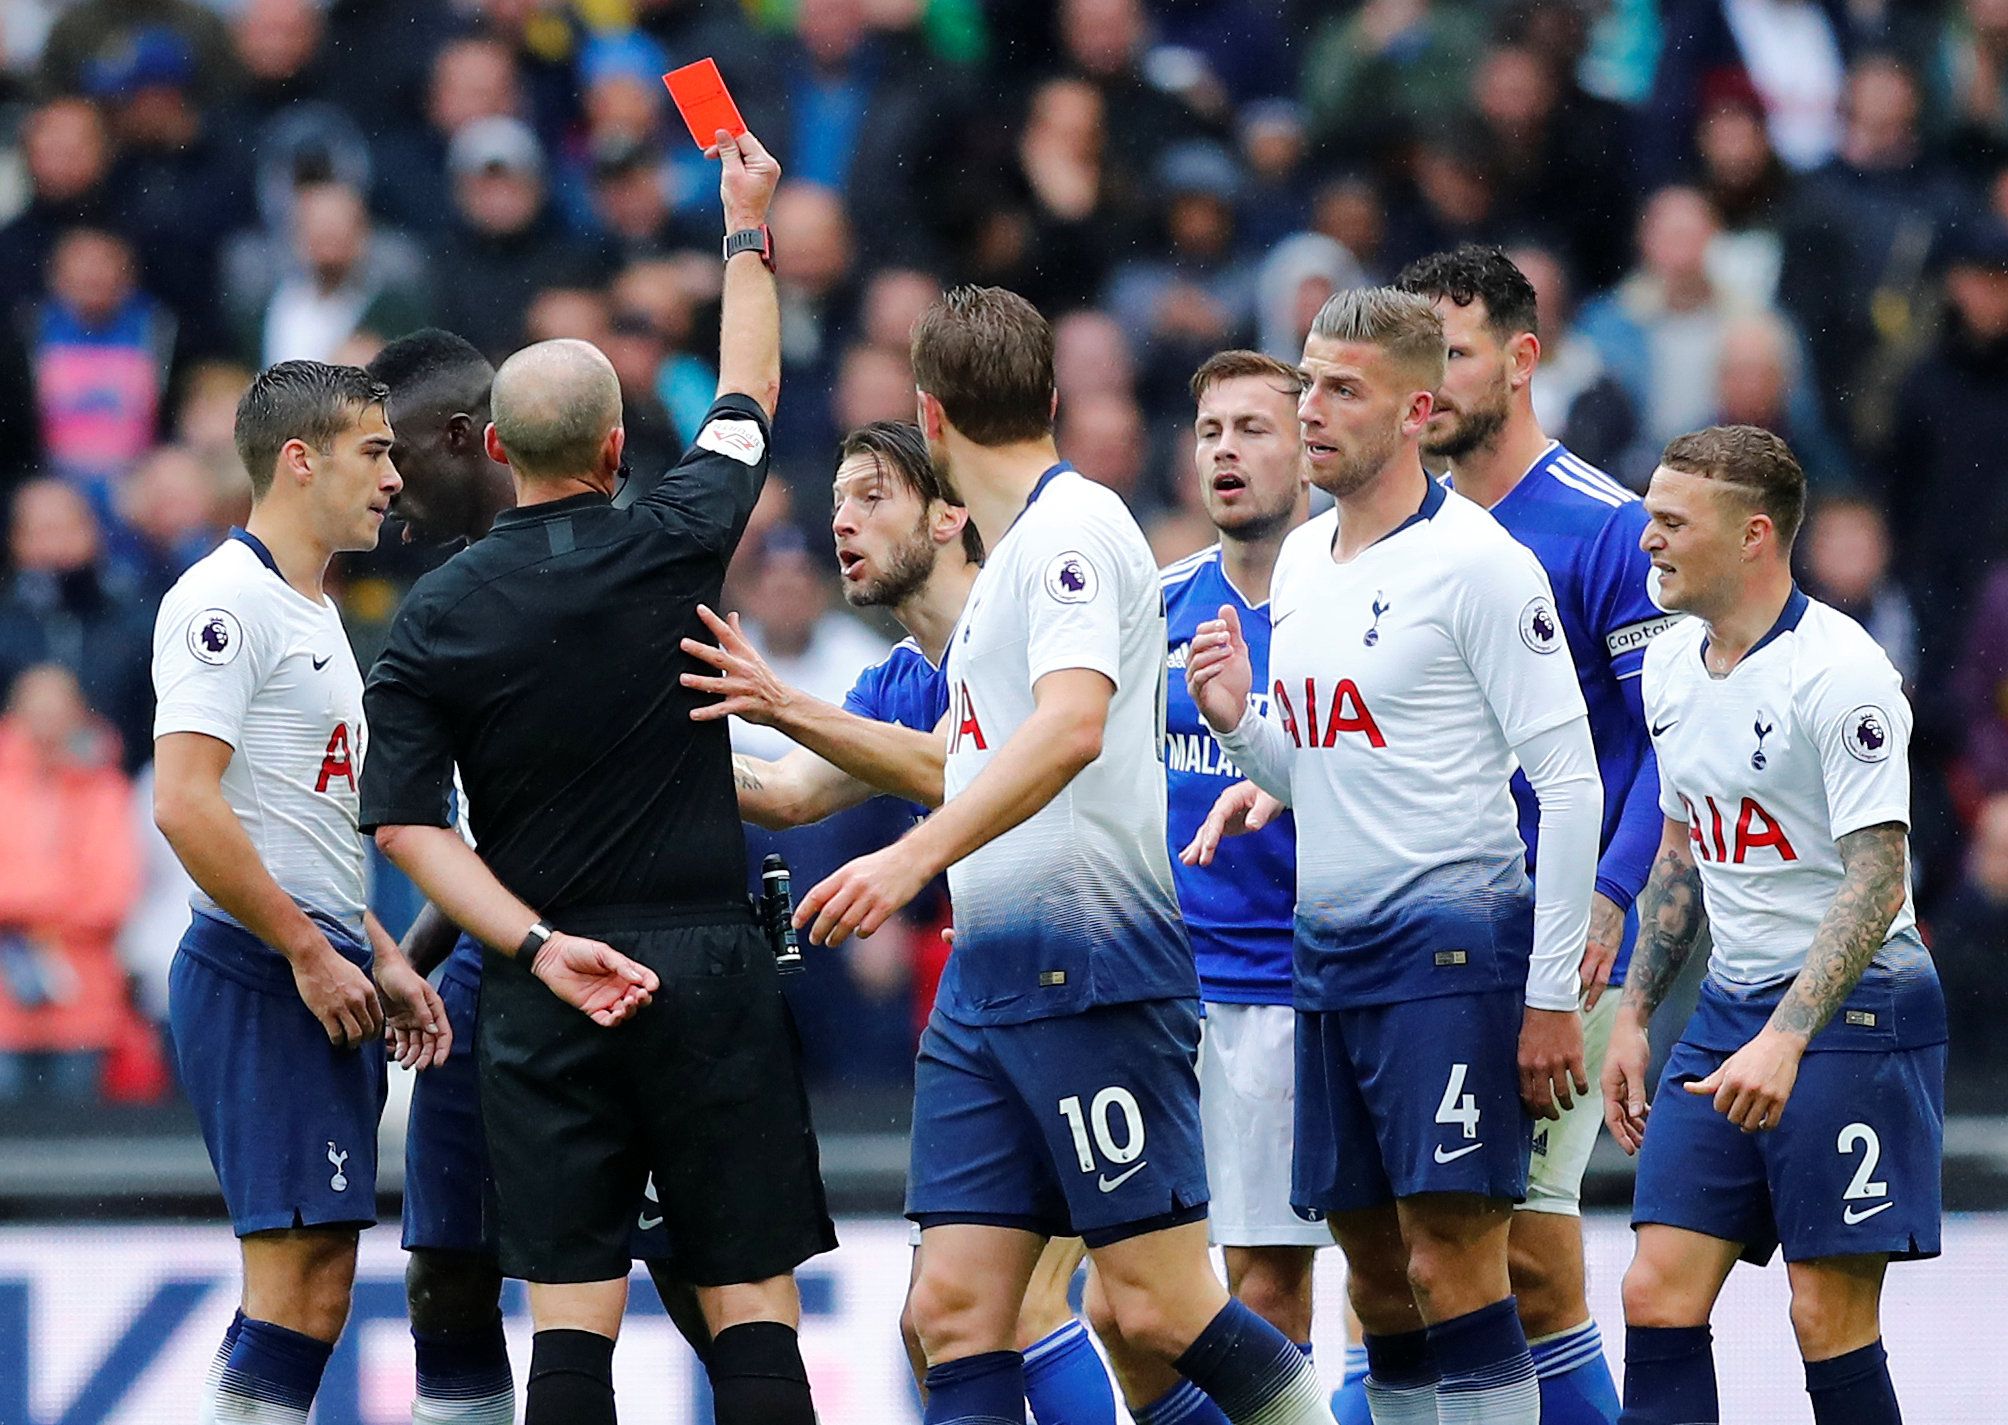 Soccer Football - Premier League - Tottenham Hotspur v Cardiff City - Wembley Stadium, London, Britain - October 6, 2018   Cardiff City's Joe Ralls is shown a red card by referee Mike Dean   REUTERS/Eddie Keogh    EDITORIAL USE ONLY. No use with unauthorized audio, video, data, fixture lists, club/league logos or "live" services. Online in-match use limited to 75 images, no video emulation. No use in betting, games or single club/league/player publications.  Please contact your account represent